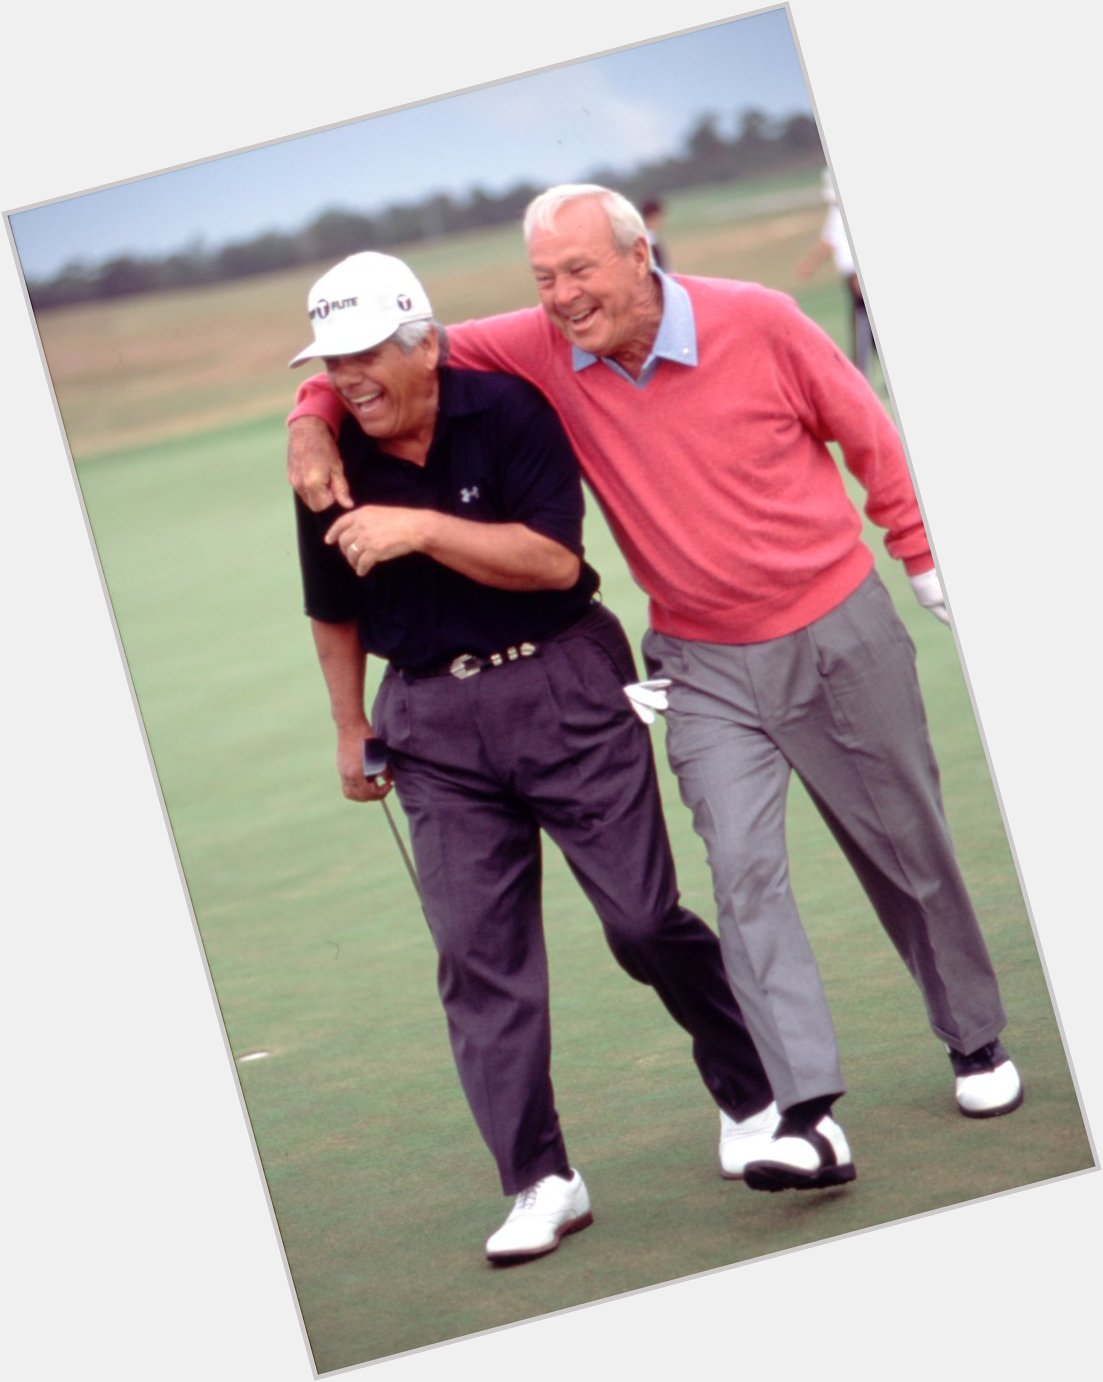 Happy 82nd birthday to Lee Trevino!   A man who rarely misses a fairway or punch line. 